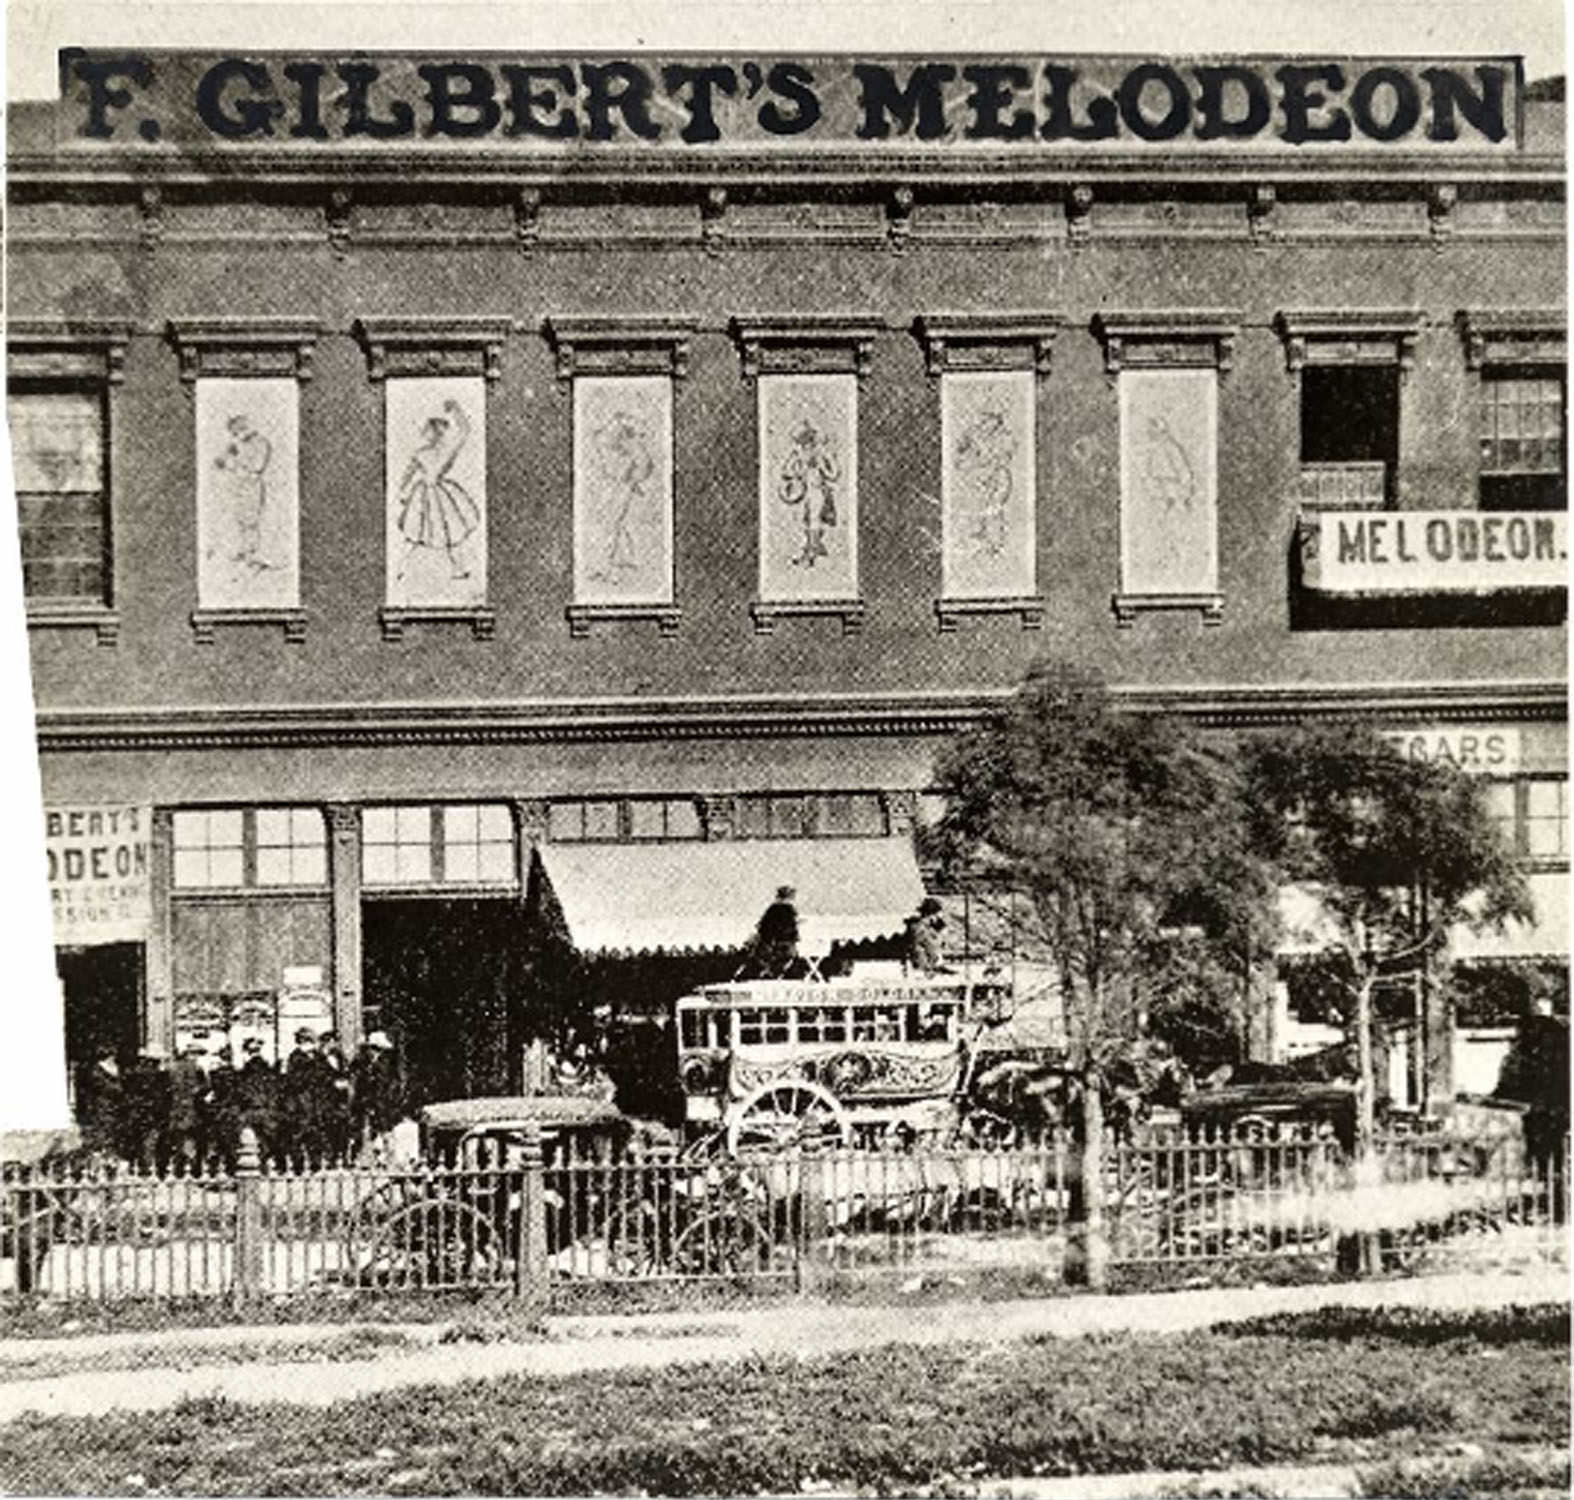 A stagecoach and several unidentified people outside of the F. Gilbert's Melodeon theater located at Clay and Kearny Streets, 1854